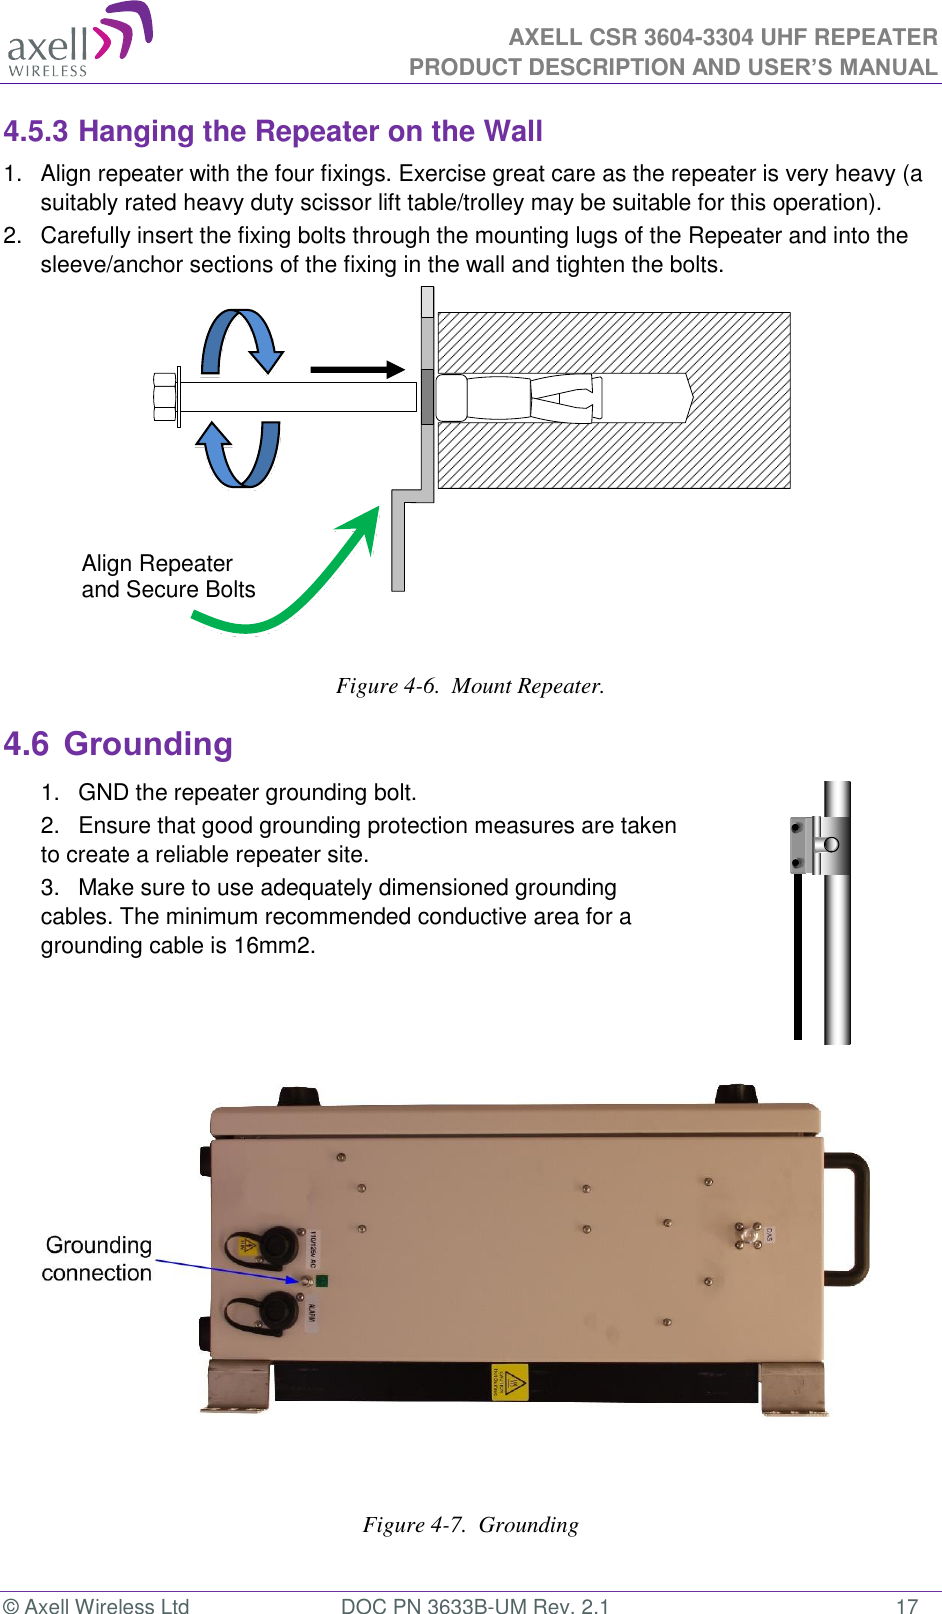  AXELL CSR 3604-3304 UHF REPEATER PRODUCT DESCRIPTION AND USER’S MANUAL  © Axell Wireless Ltd  DOC PN 3633B-UM Rev. 2.1  17 4.5.3 Hanging the Repeater on the Wall 1.  Align repeater with the four fixings. Exercise great care as the repeater is very heavy (a suitably rated heavy duty scissor lift table/trolley may be suitable for this operation).  2.   Carefully insert the fixing bolts through the mounting lugs of the Repeater and into the sleeve/anchor sections of the fixing in the wall and tighten the bolts.    Figure 4-6.  Mount Repeater. 4.6 Grounding 1.  GND the repeater grounding bolt. 2.  Ensure that good grounding protection measures are taken to create a reliable repeater site.  3.  Make sure to use adequately dimensioned grounding cables. The minimum recommended conductive area for a grounding cable is 16mm2.           Figure 4-7.  Grounding Align Repeater and Secure Bolts 